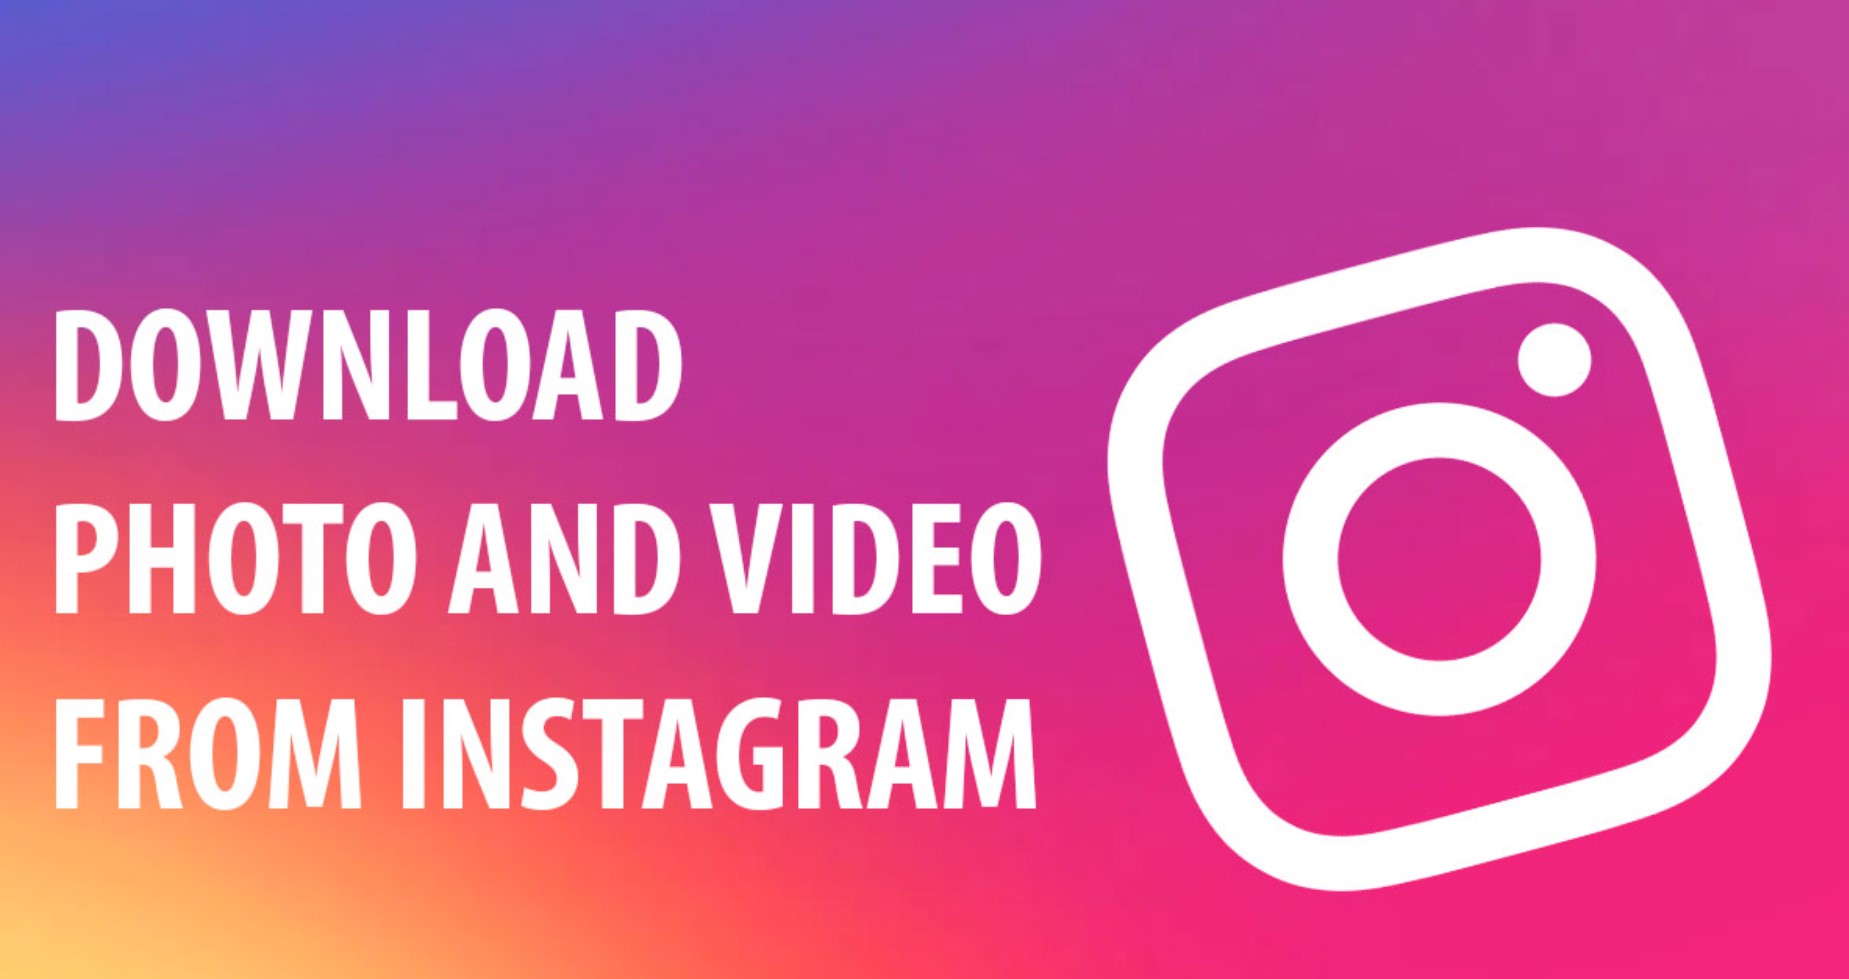 How can I download videos and photos via Instagram online?